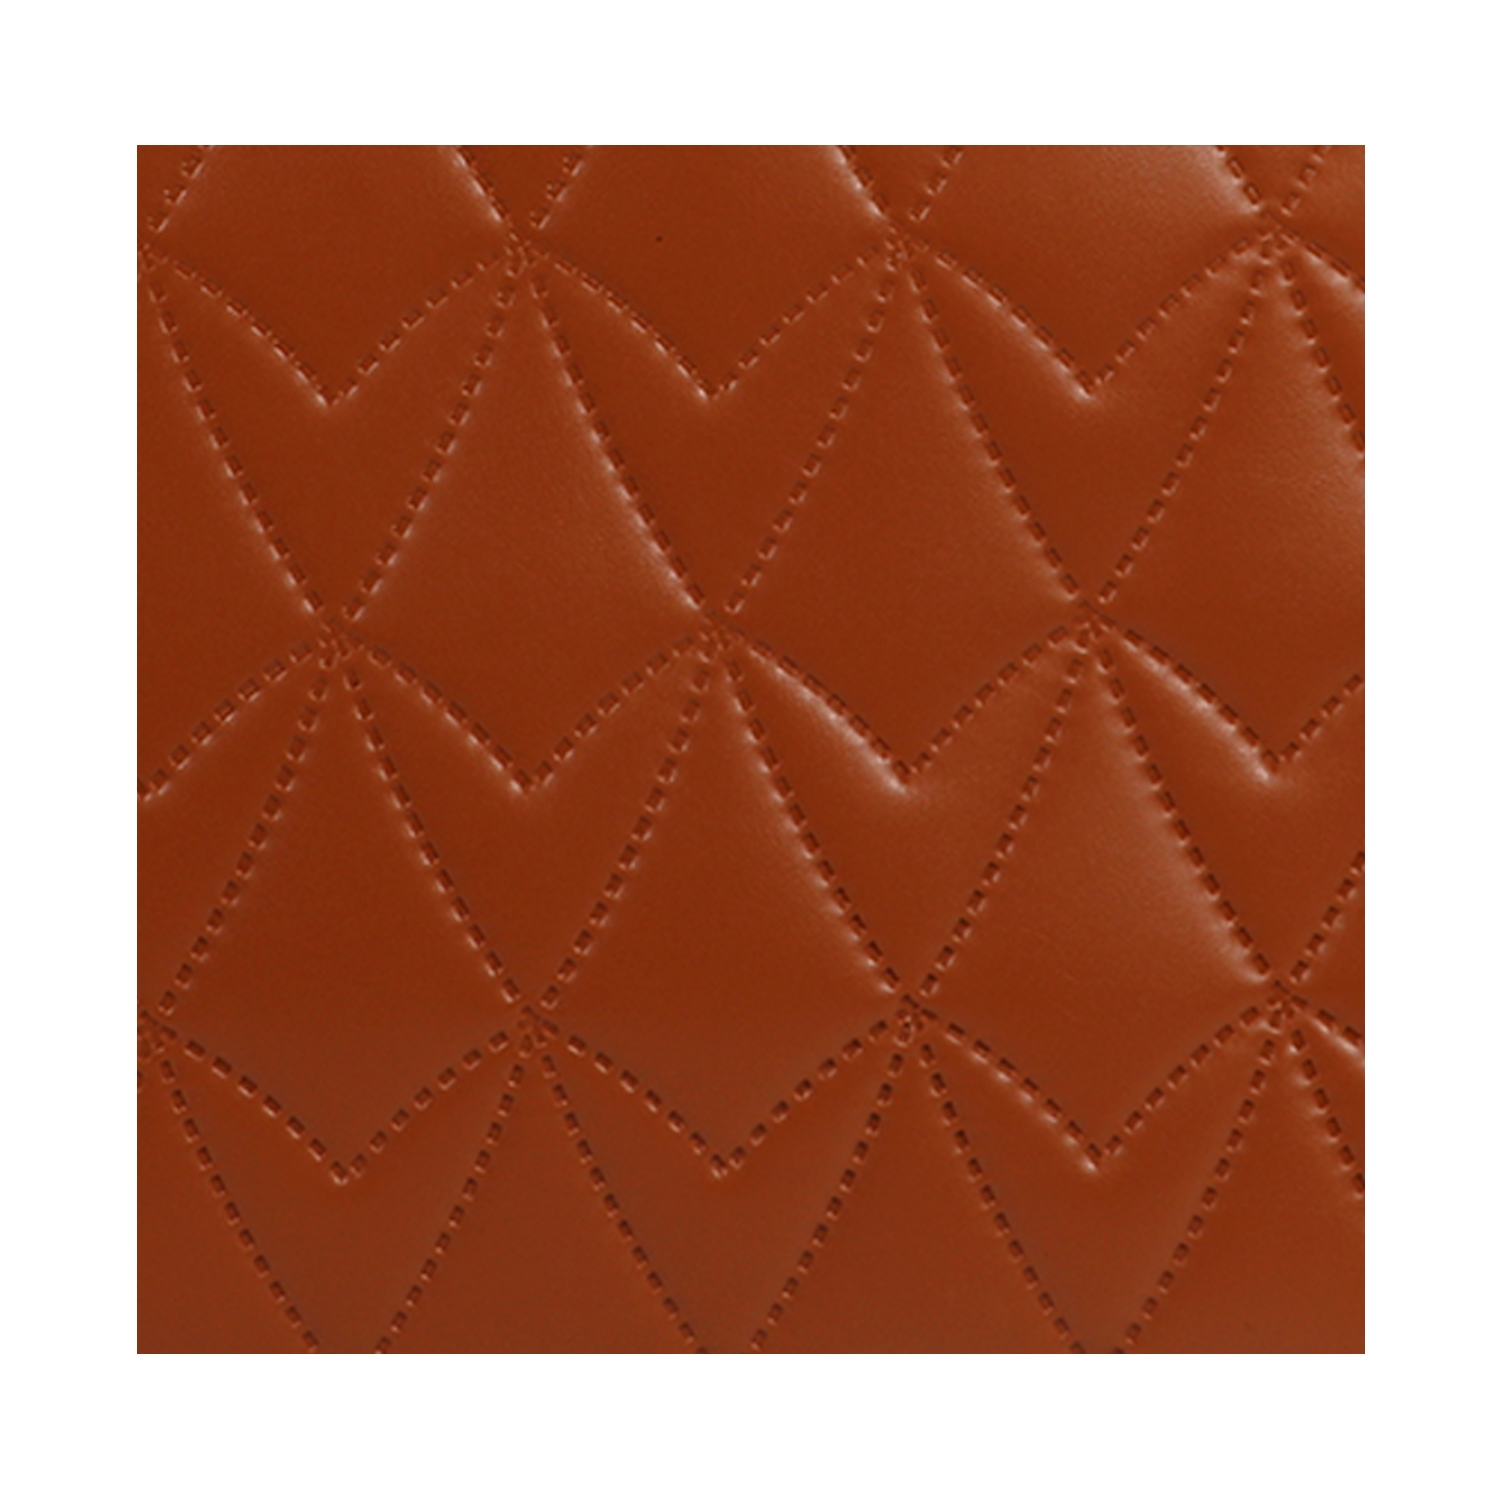 Brown Quilted Satchel Bag